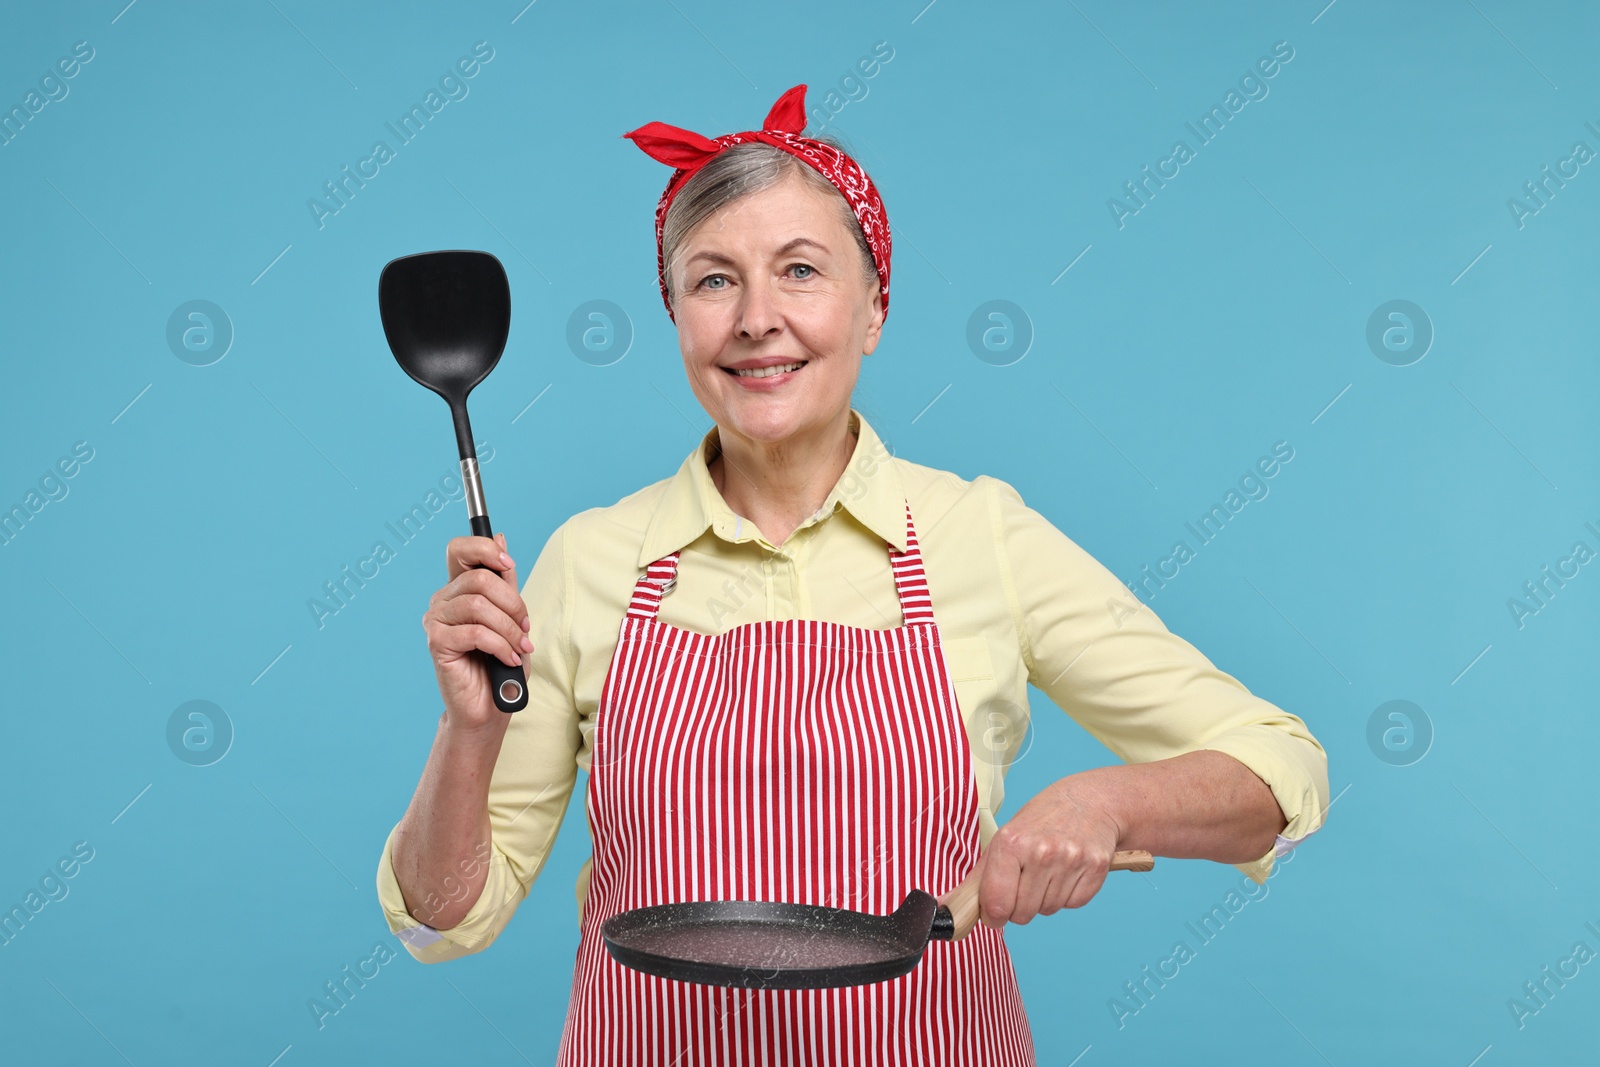 Photo of Happy housewife with turner and frying pan on light blue background